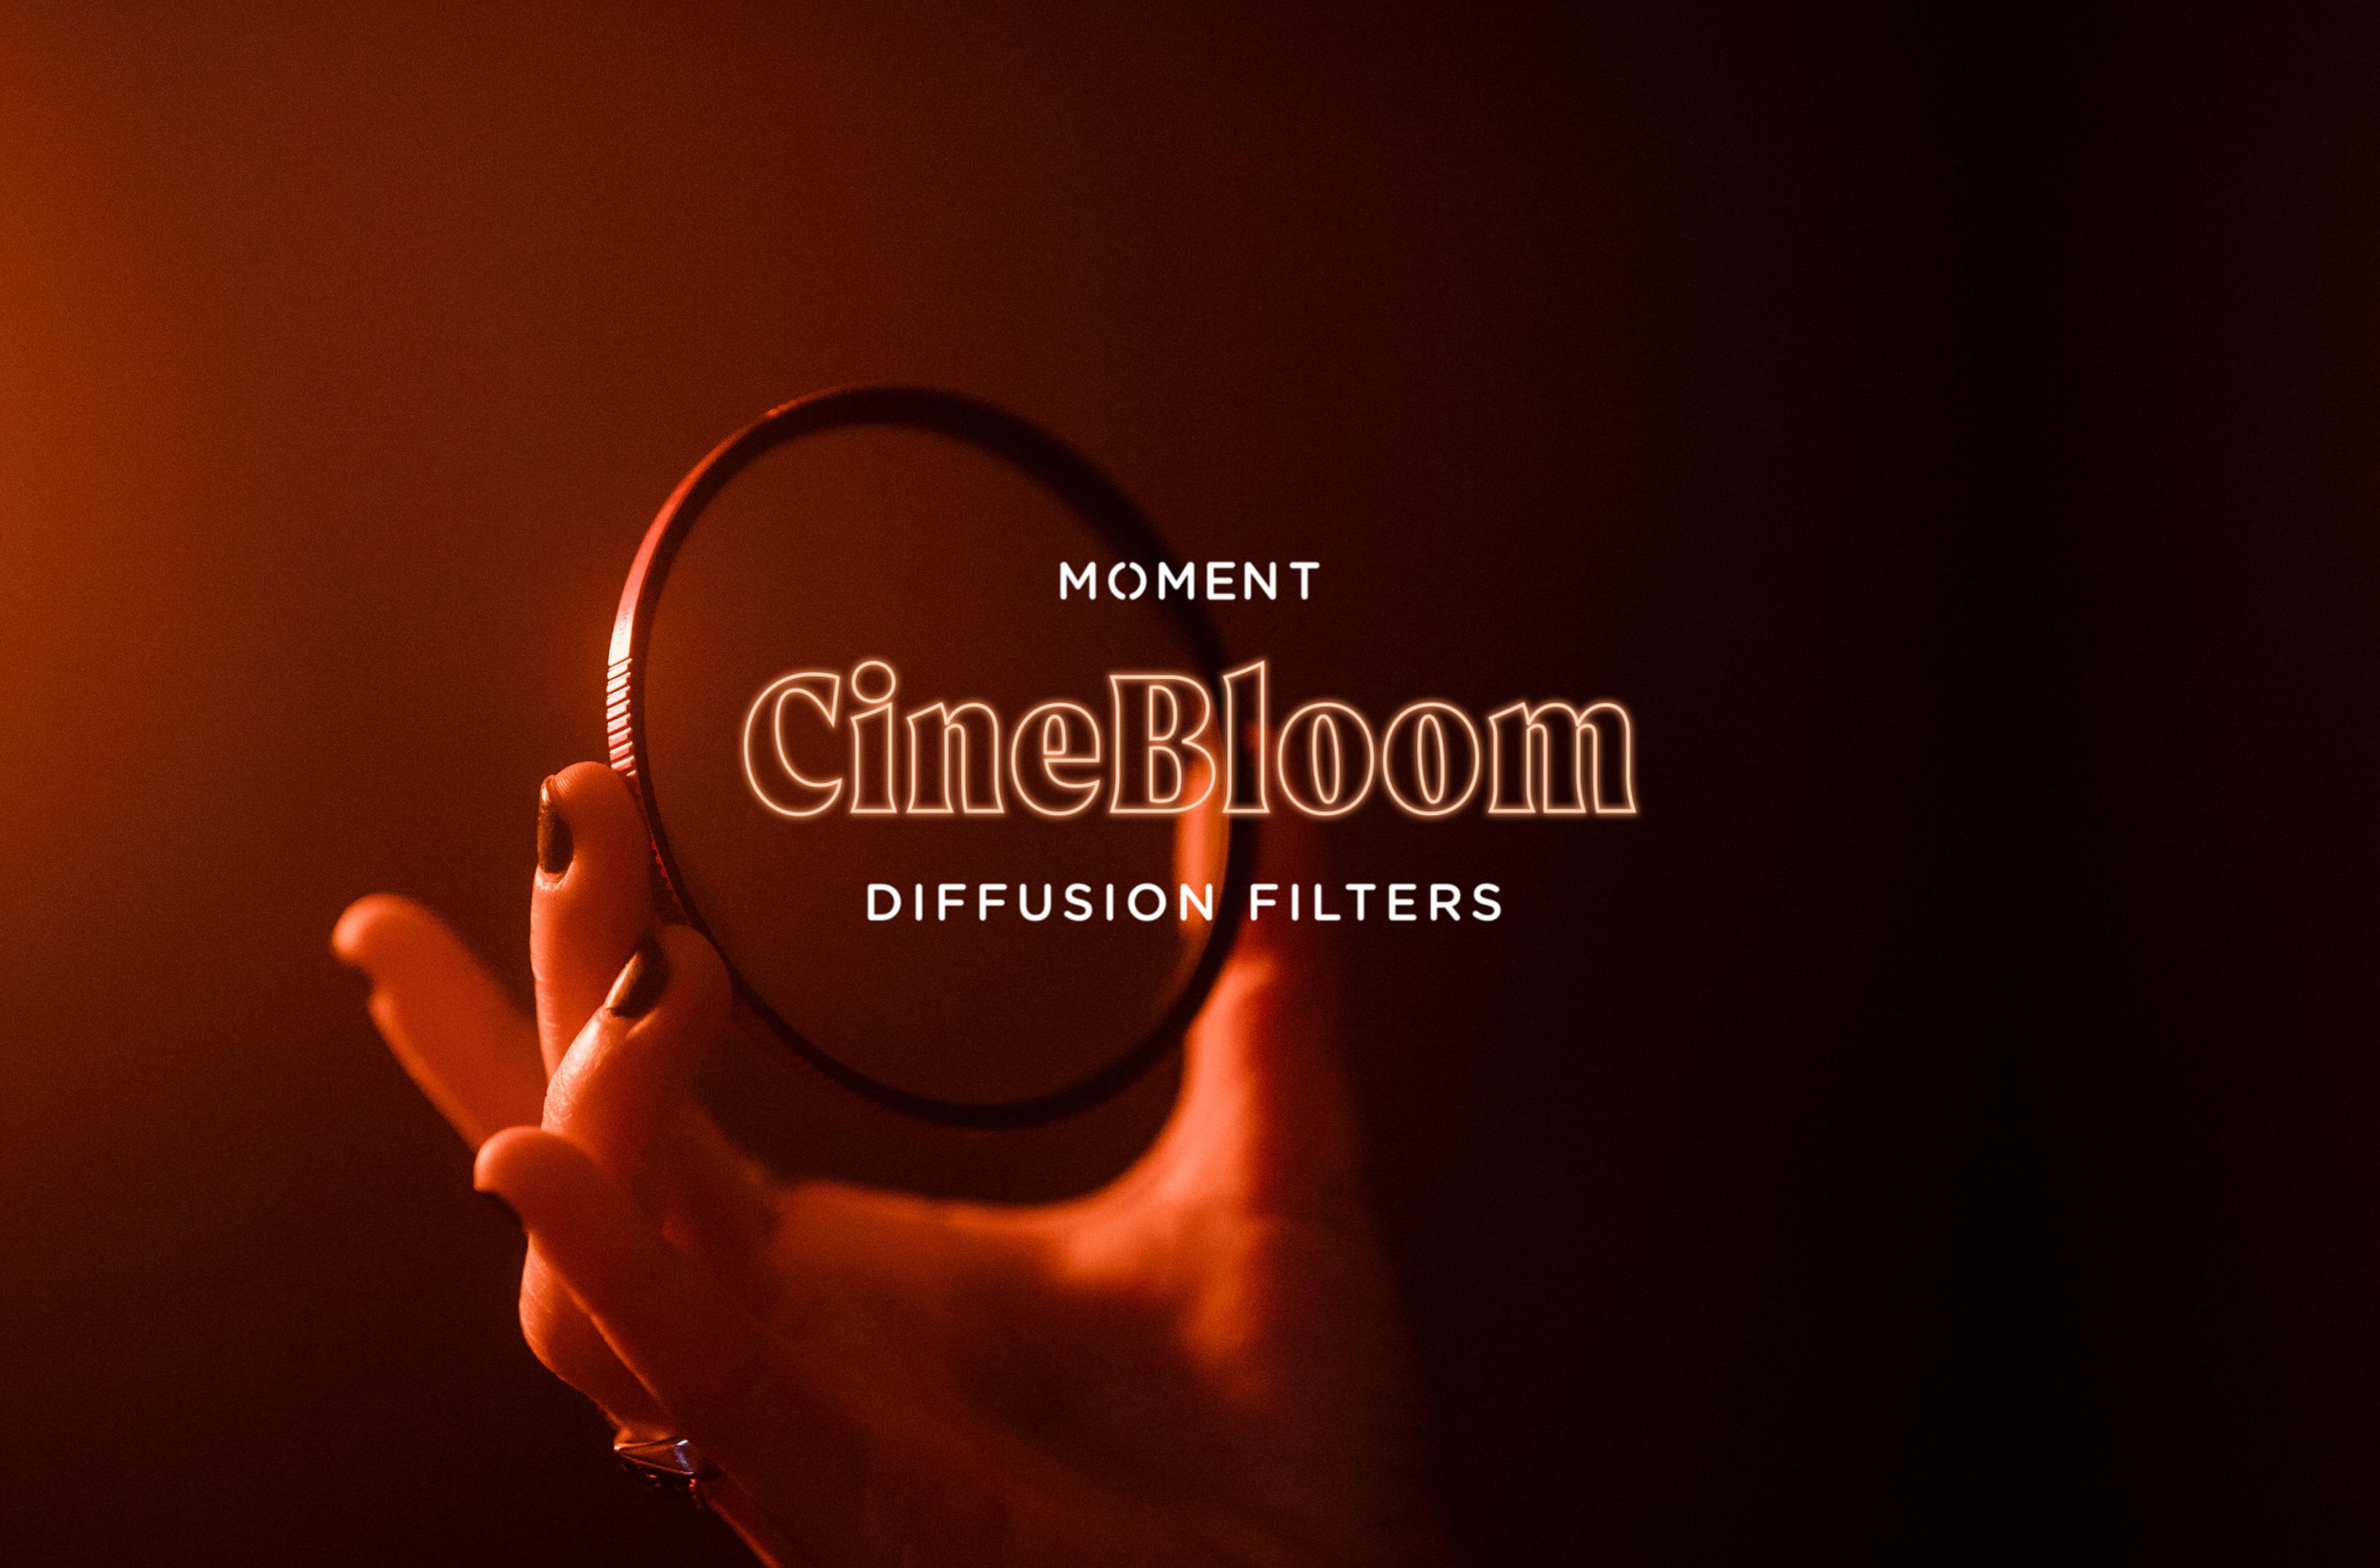 Moment CineBloom Diffusion Filters - Moment